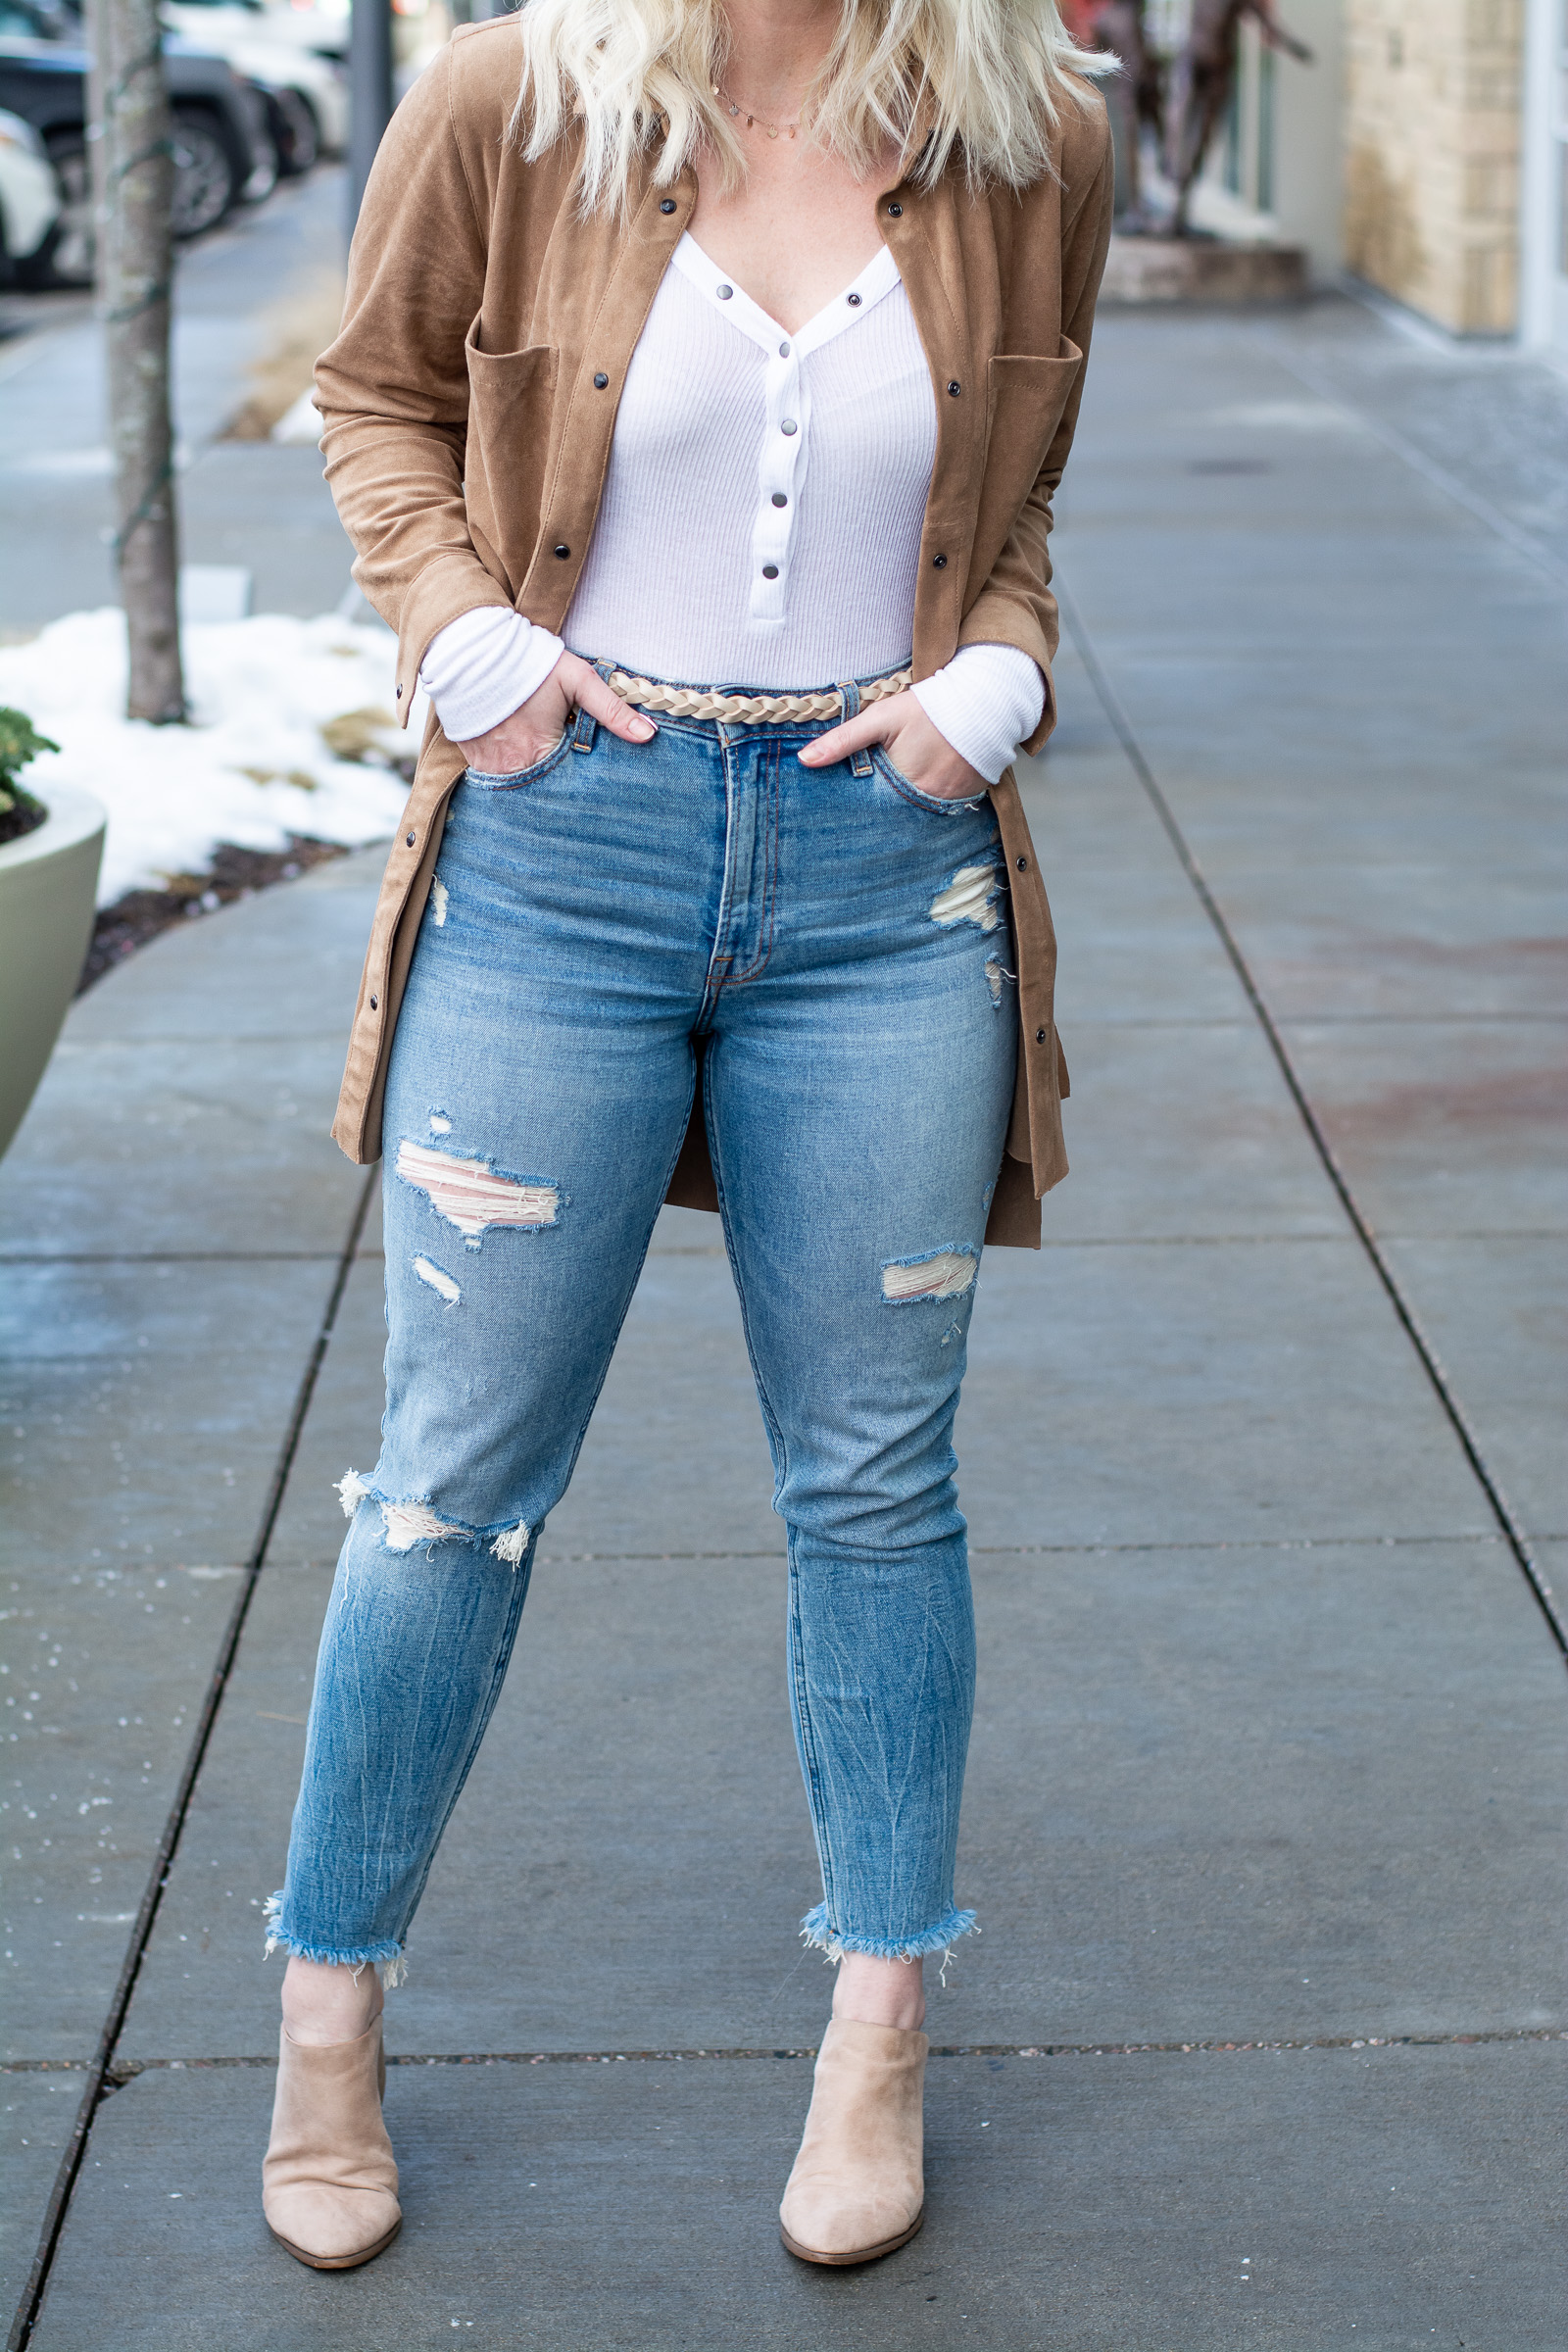 A Dress as a Jacket with Girlfriend Jeans. | Ash from LSR